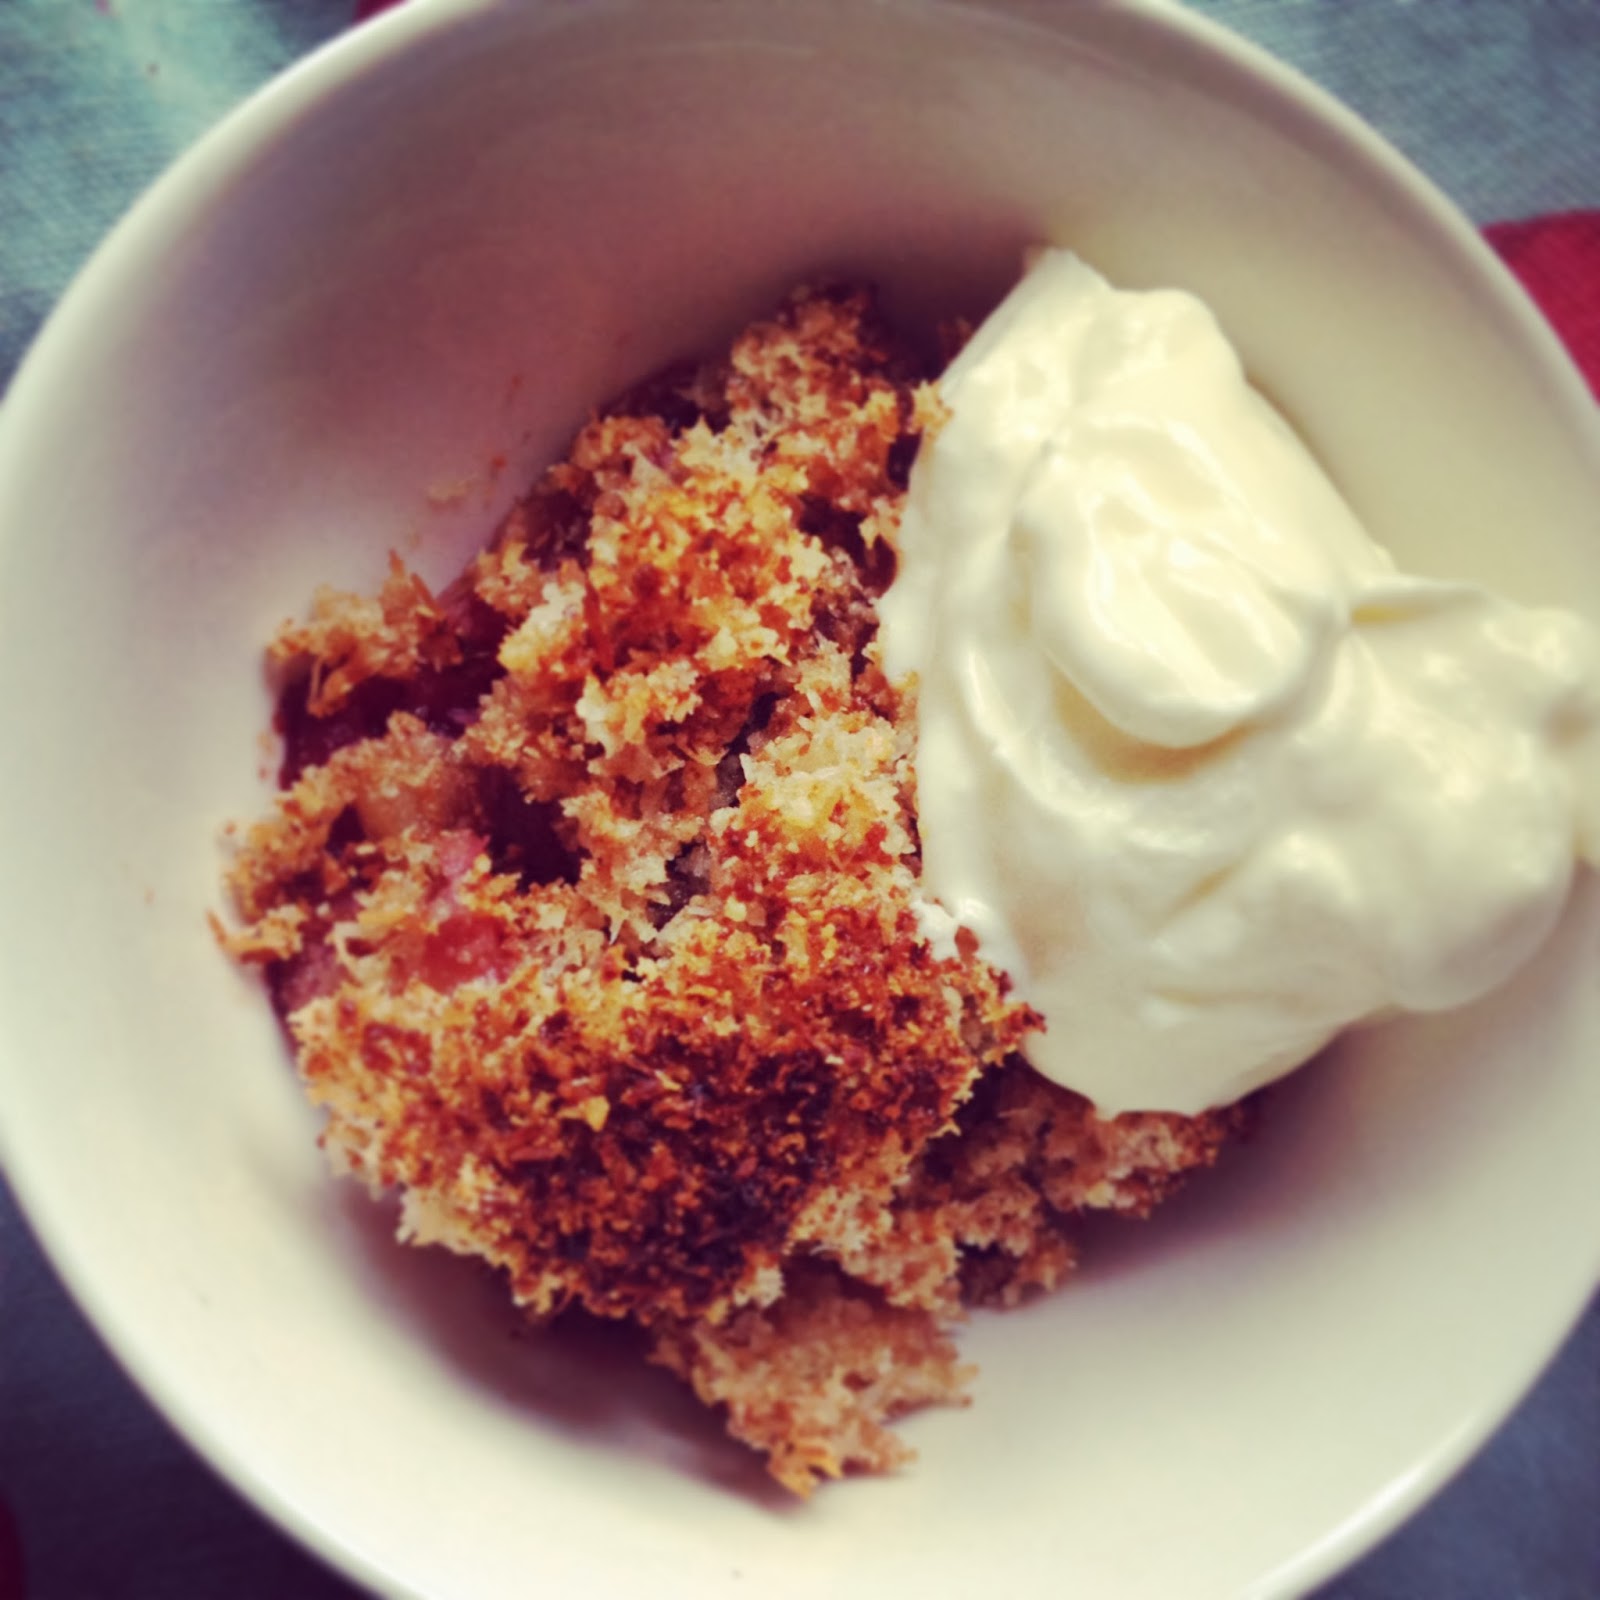 Fruit Crumble Vegan Gluten-Free Photo Credit: Lucy Corry/The Kitchenmaid